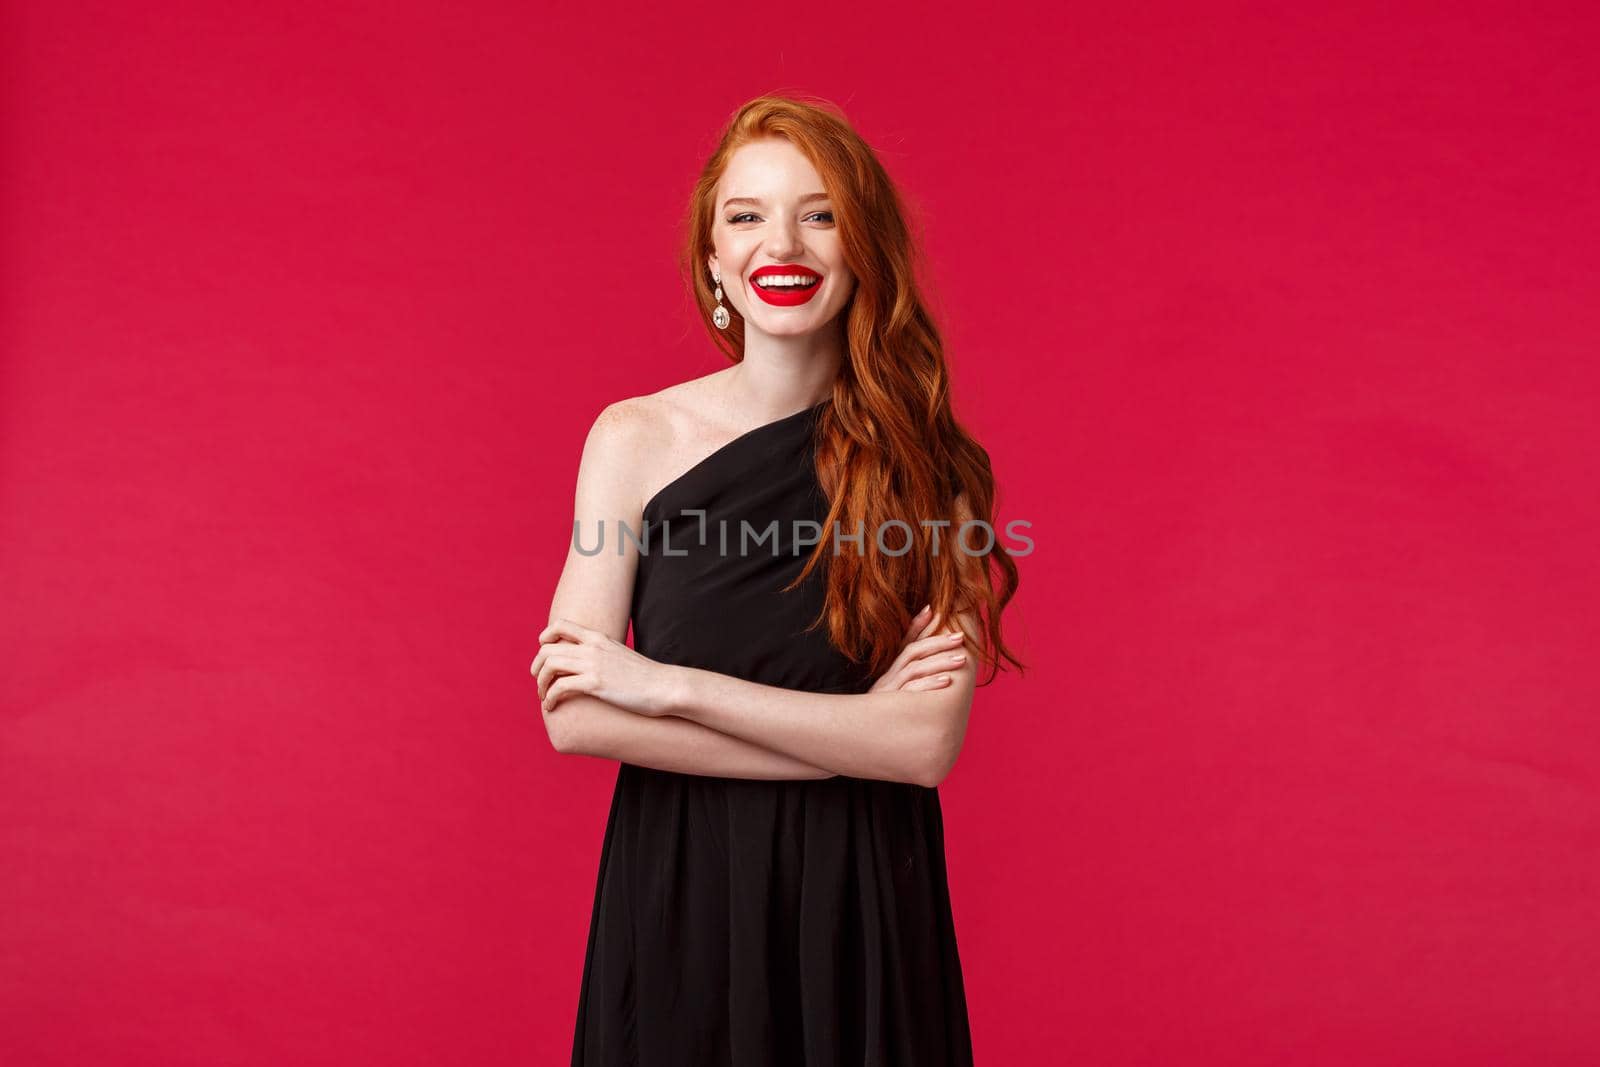 Elegance, fashion and woman concept. Portrait of elegant and sexy confident young woman with ginger hair, wear stylish black dress and makeup, laughing, cross hands chest assertive.